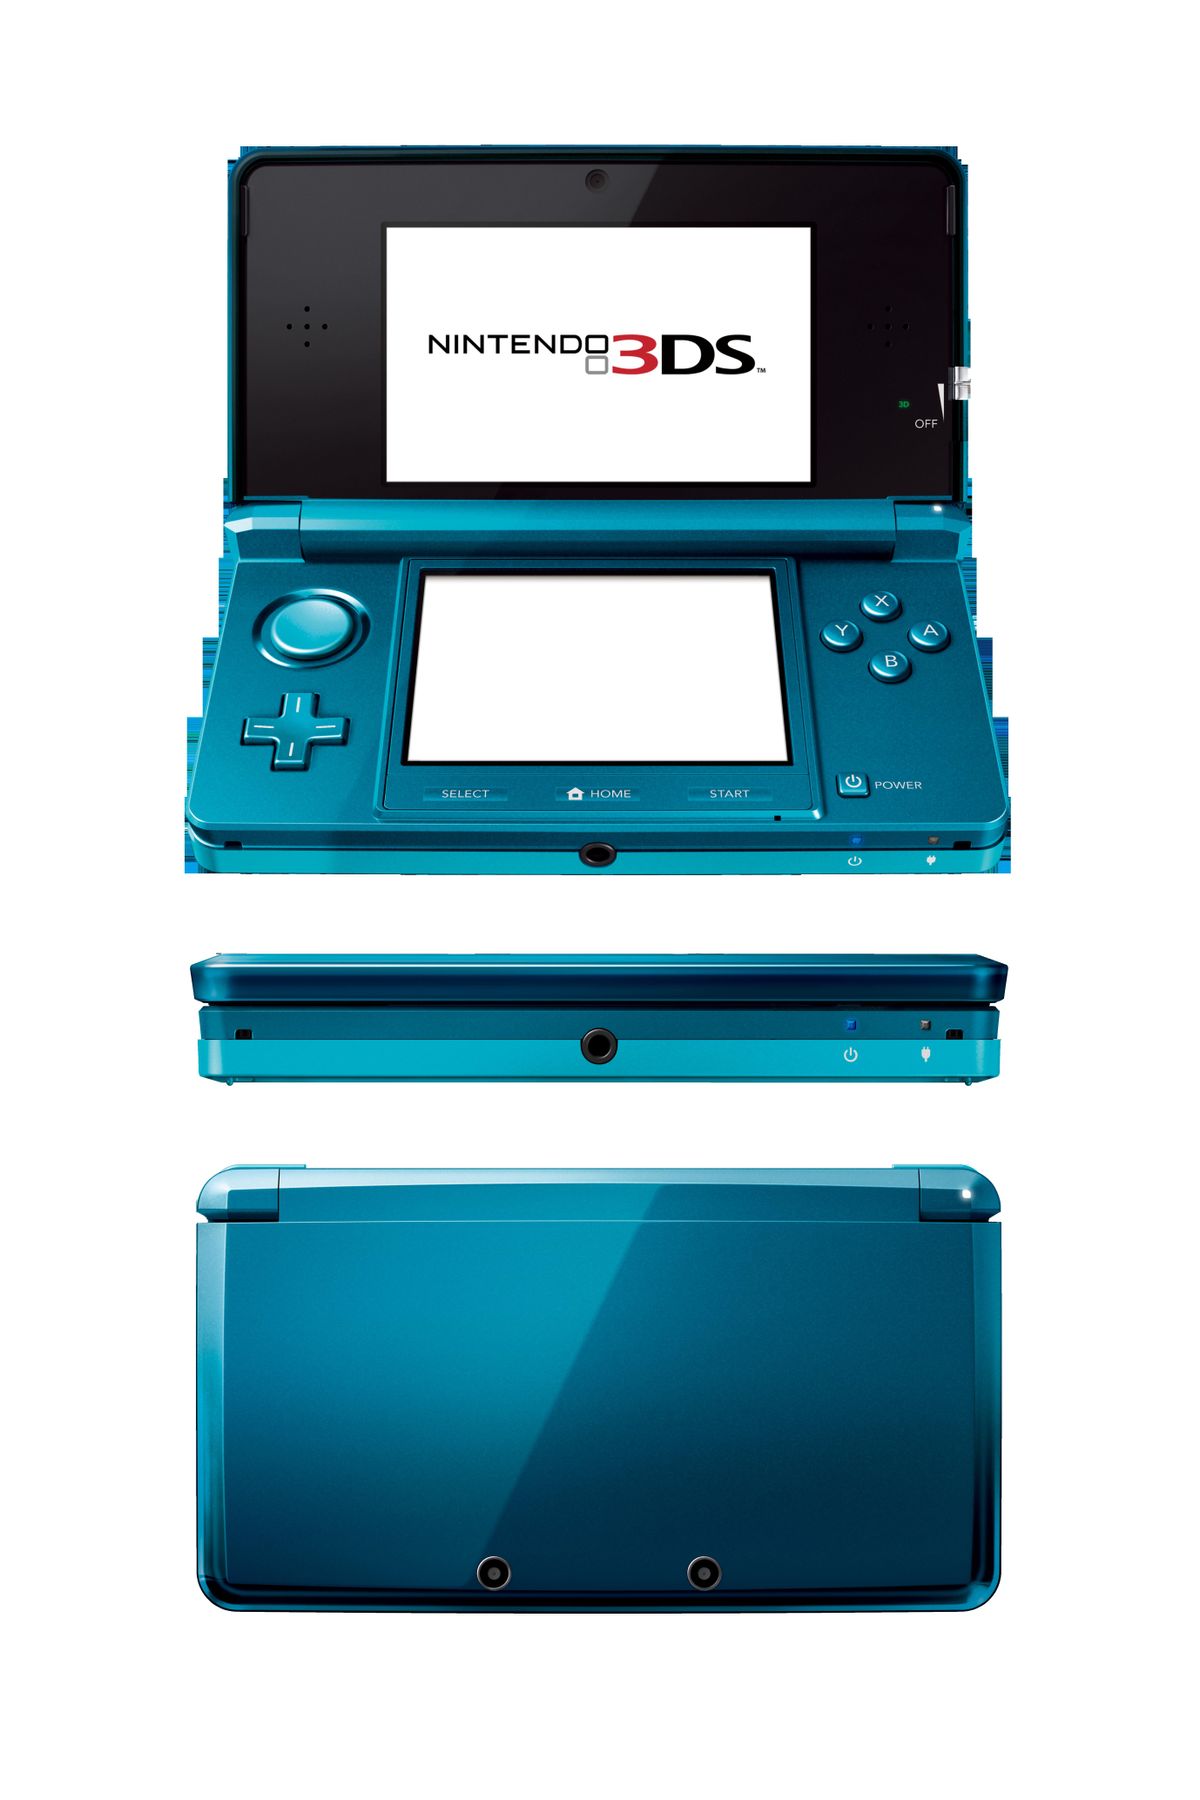 how much does a 3ds cost at gamestop